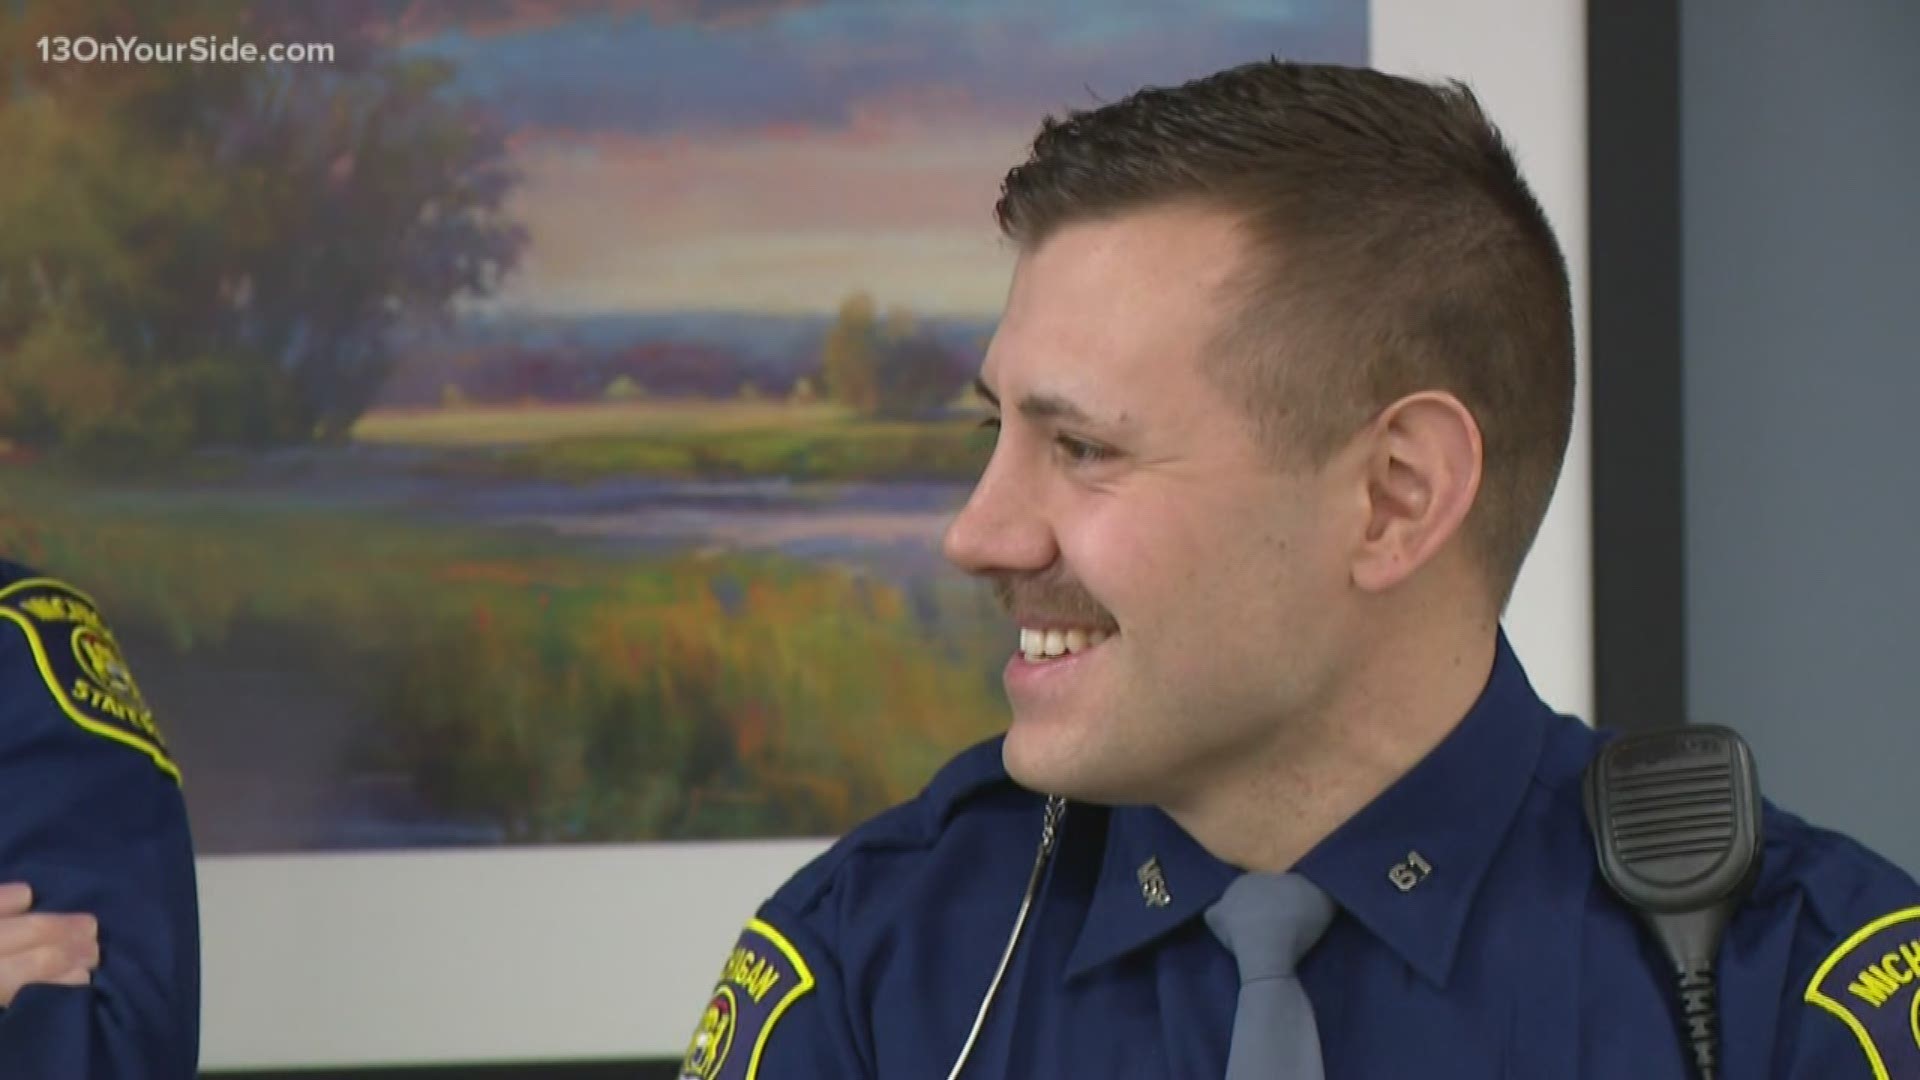 A Michigan State Police trooper gave the man who trained him the gift of life.